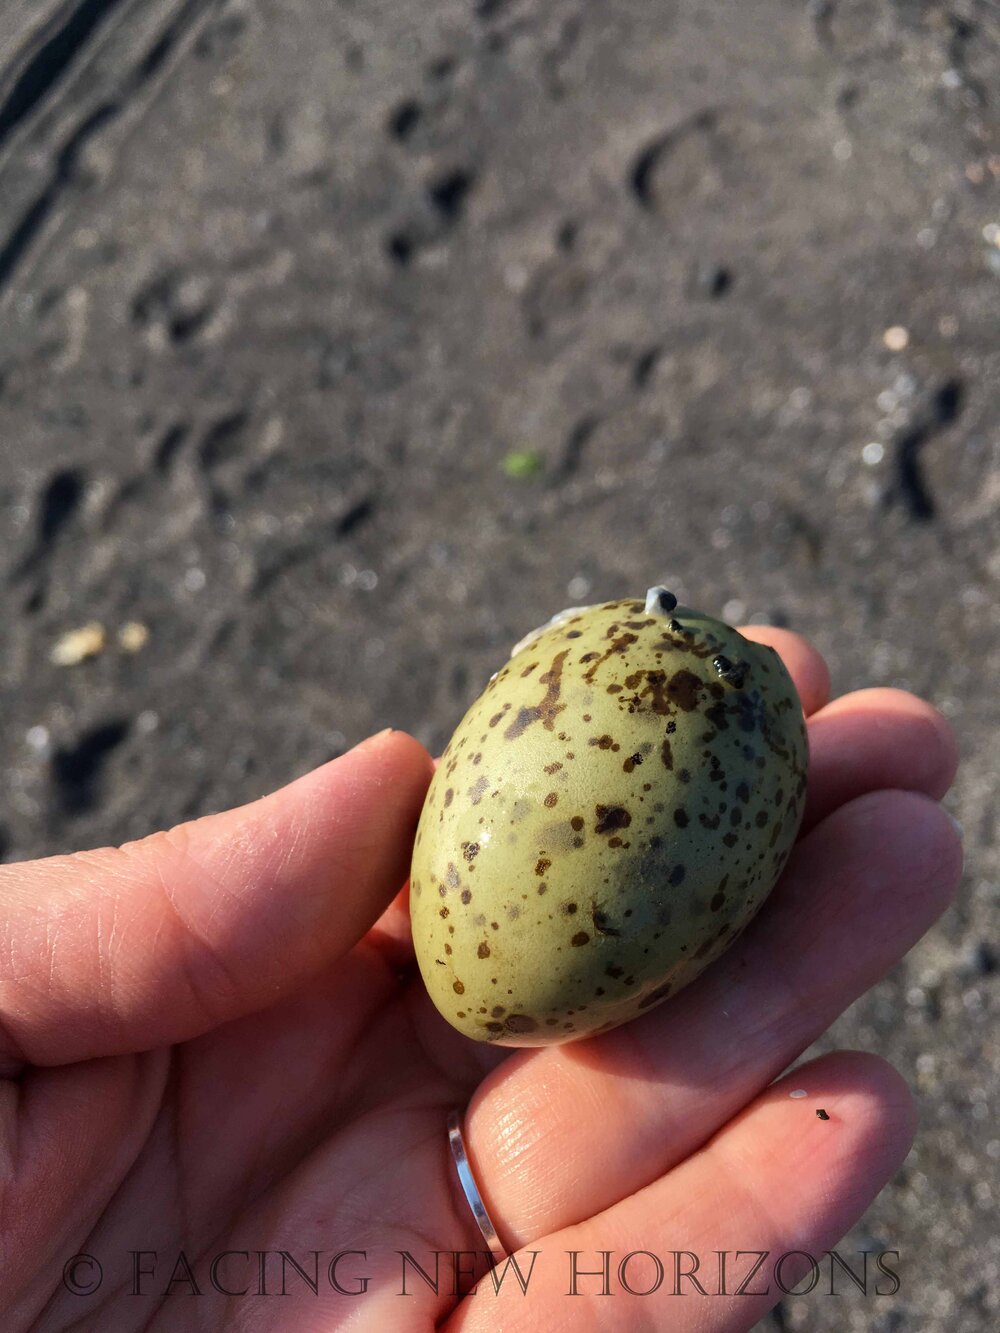  Egg shell, I assume from one of the gulls 